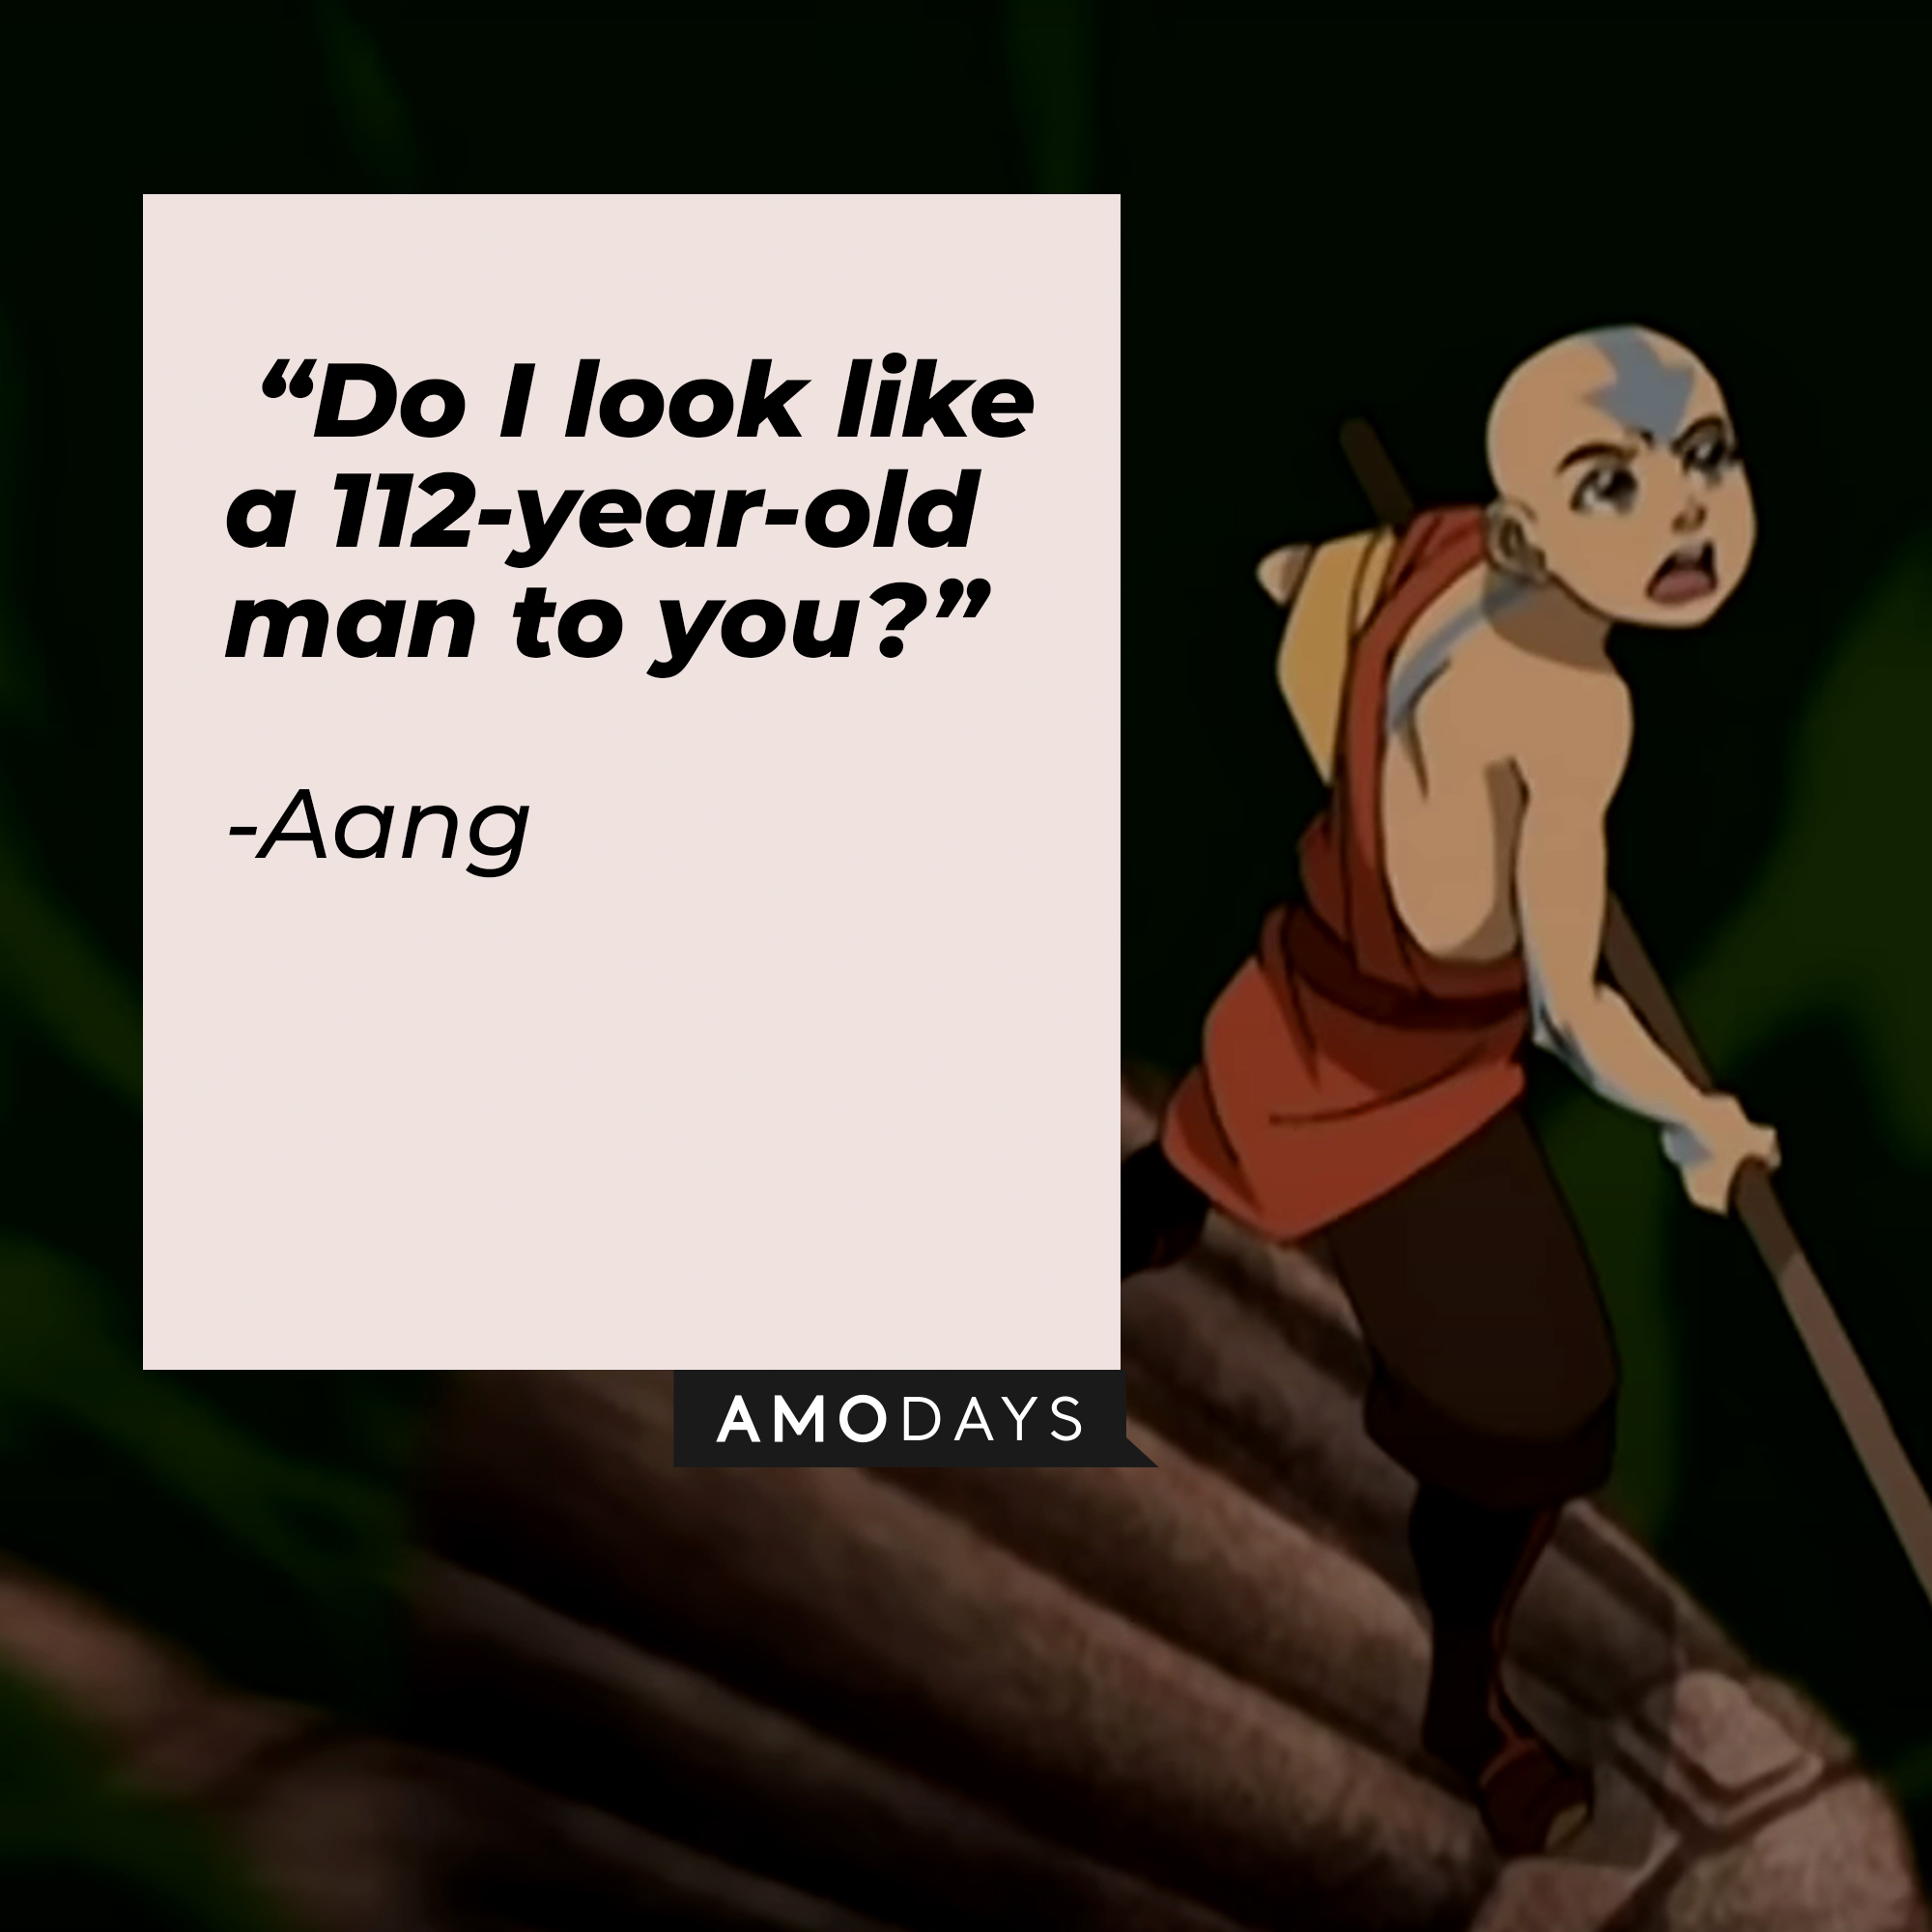 Aang’s quote: “Do I look like a 112-year-old man to you?” | Source: Youtube.com/TeamAvatar